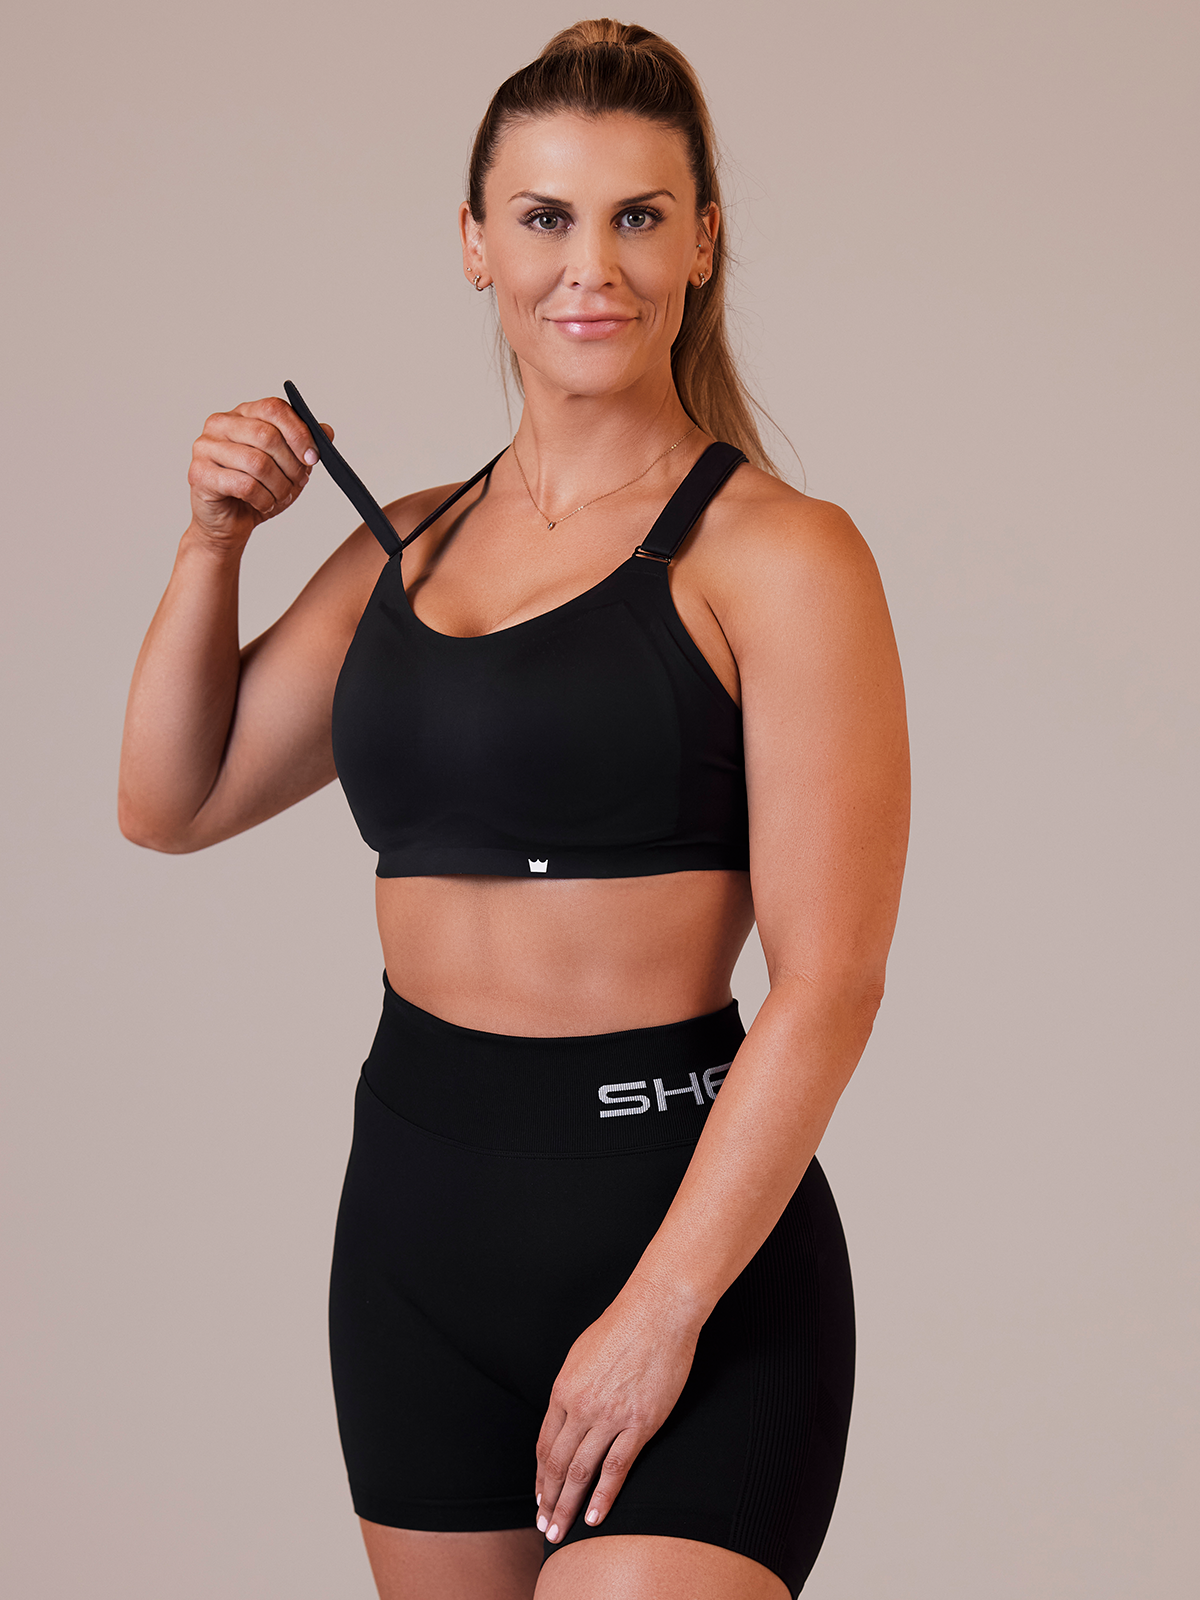 Black SHEFIT® Flex Sports Bra. The Support and Fit like no other. 